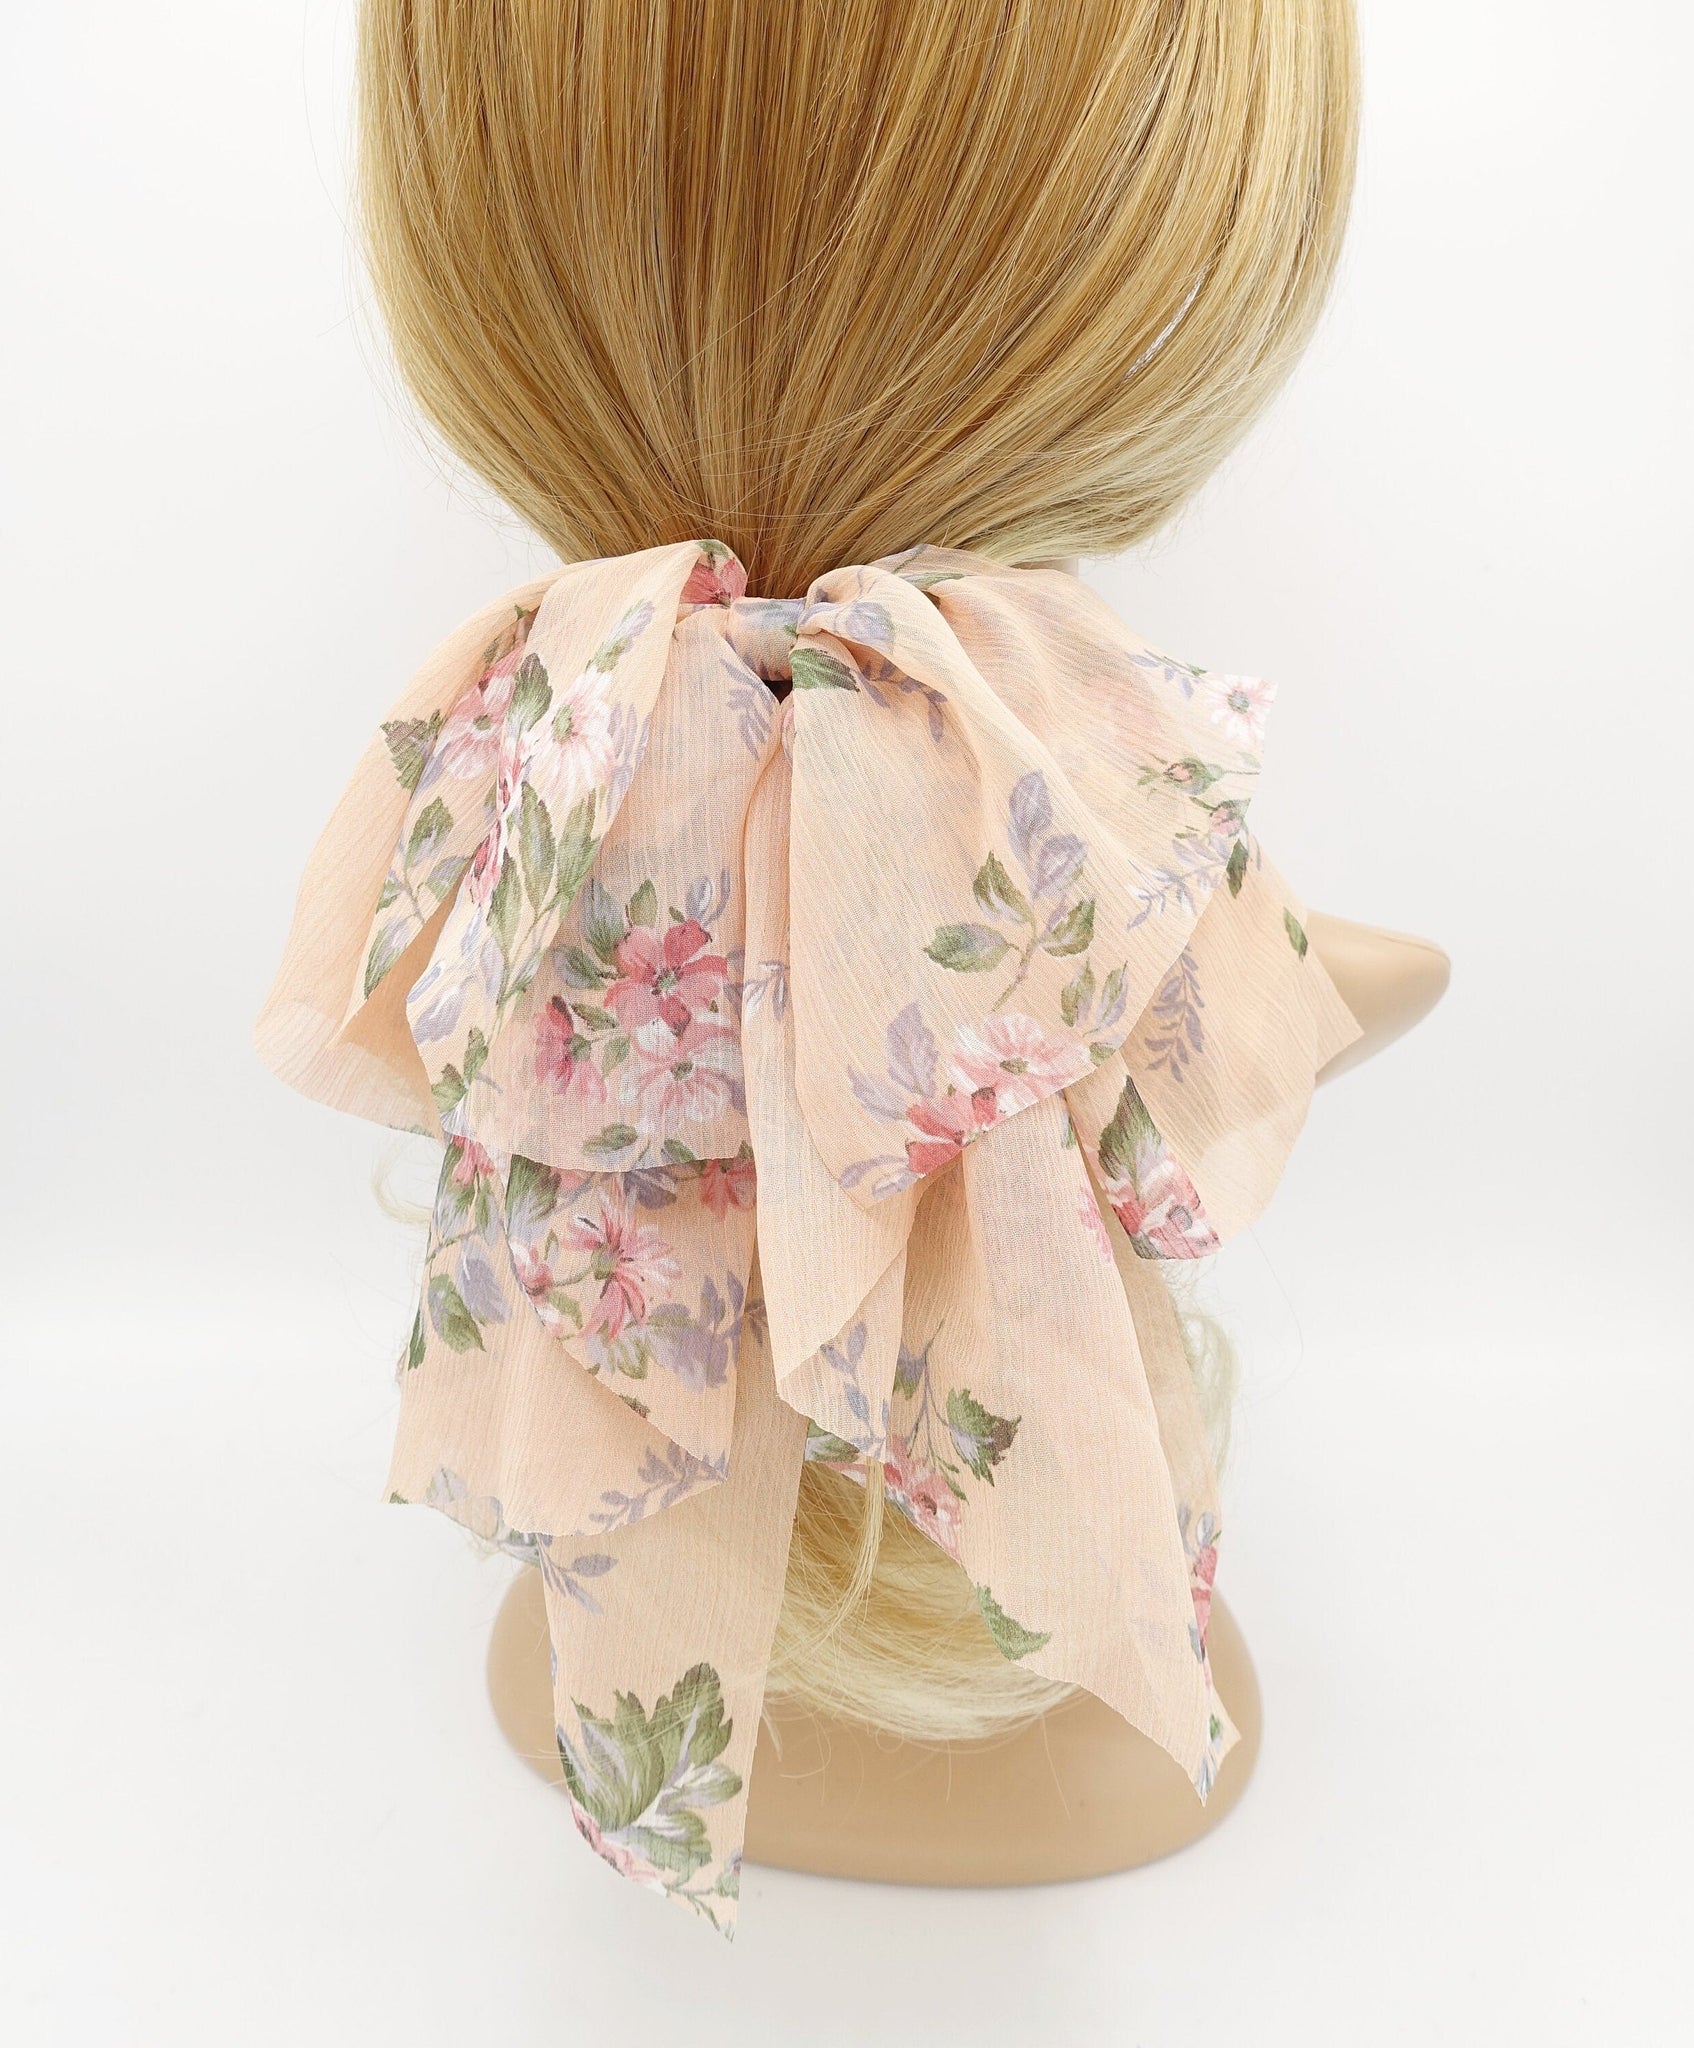 veryshine.com Barrette (Bow) Peach chiffon floral layered hair bow droopy style feminine accessory for women